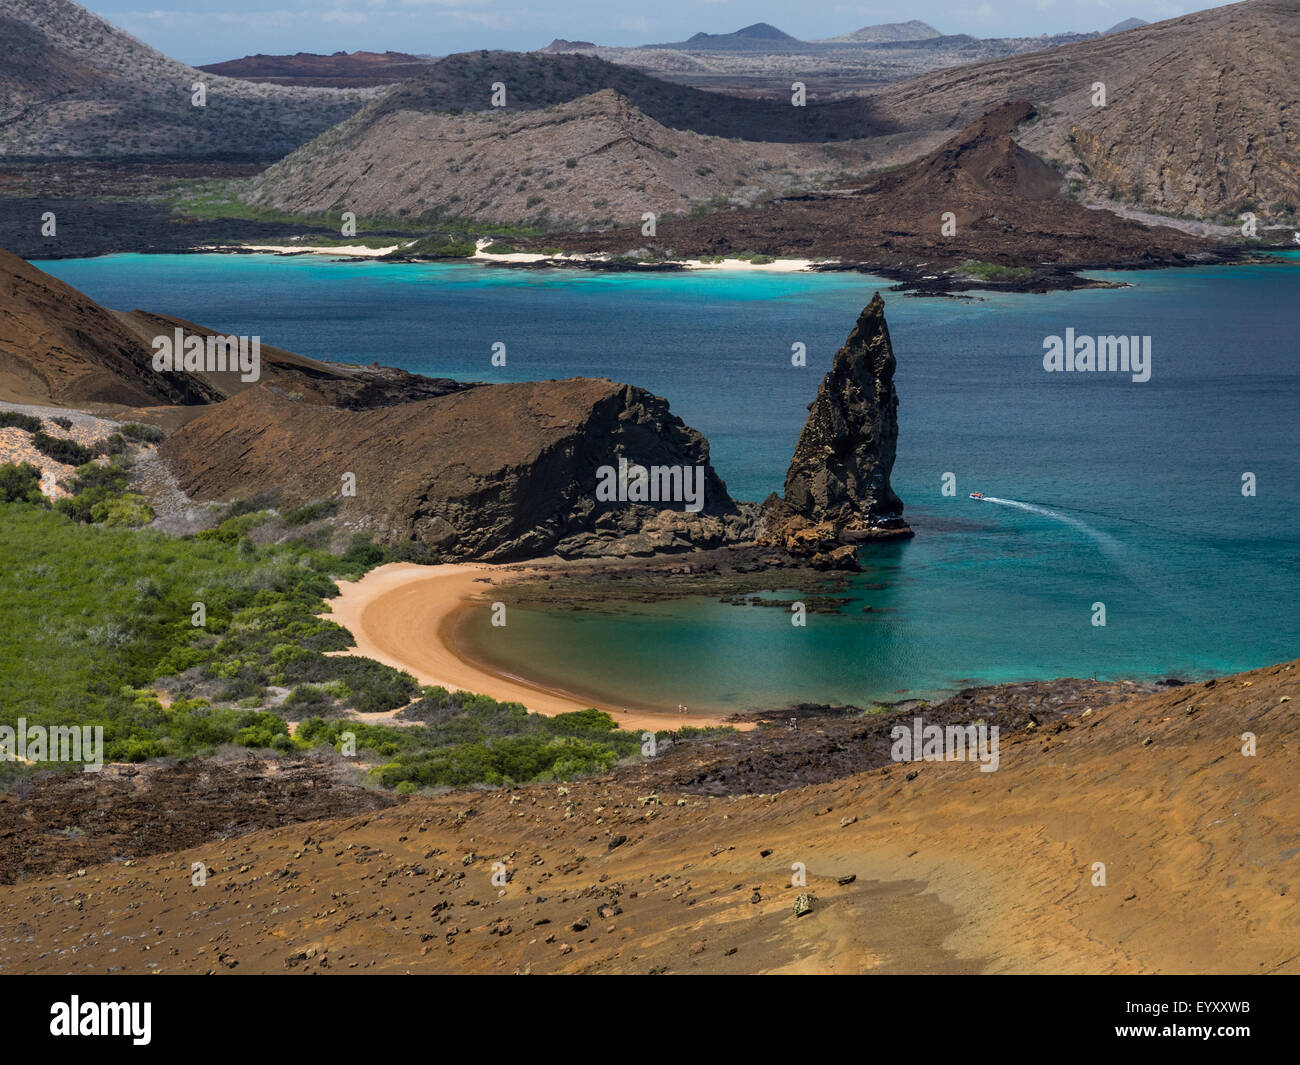 View of Pinnacle Rock and surrounding bays from Bartolome Island in the Galapagos Archipelago Stock Photo